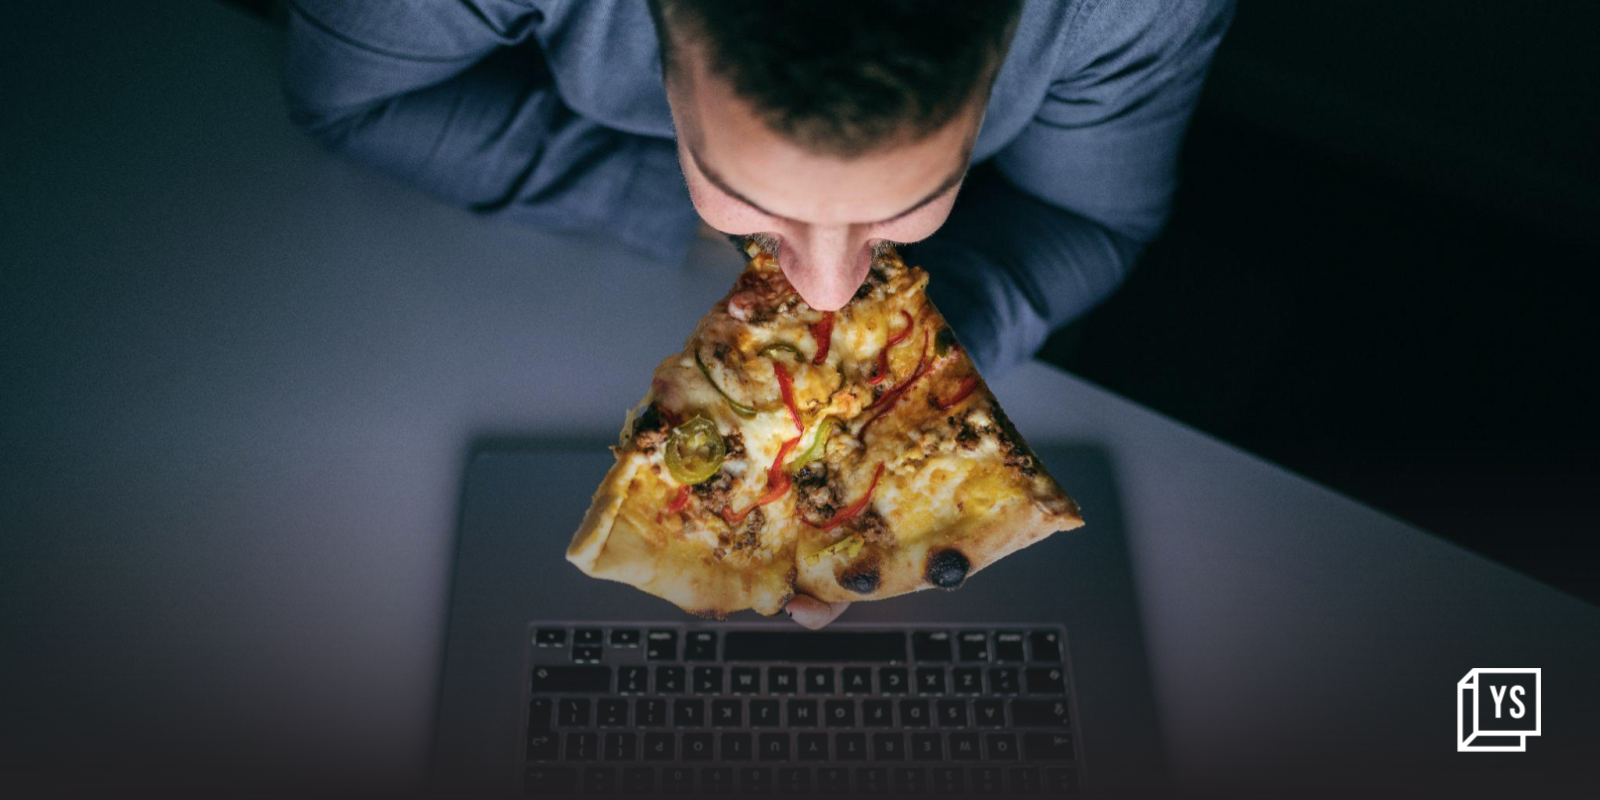 Hungry late at night? The 4 ways to beat late-night cravings